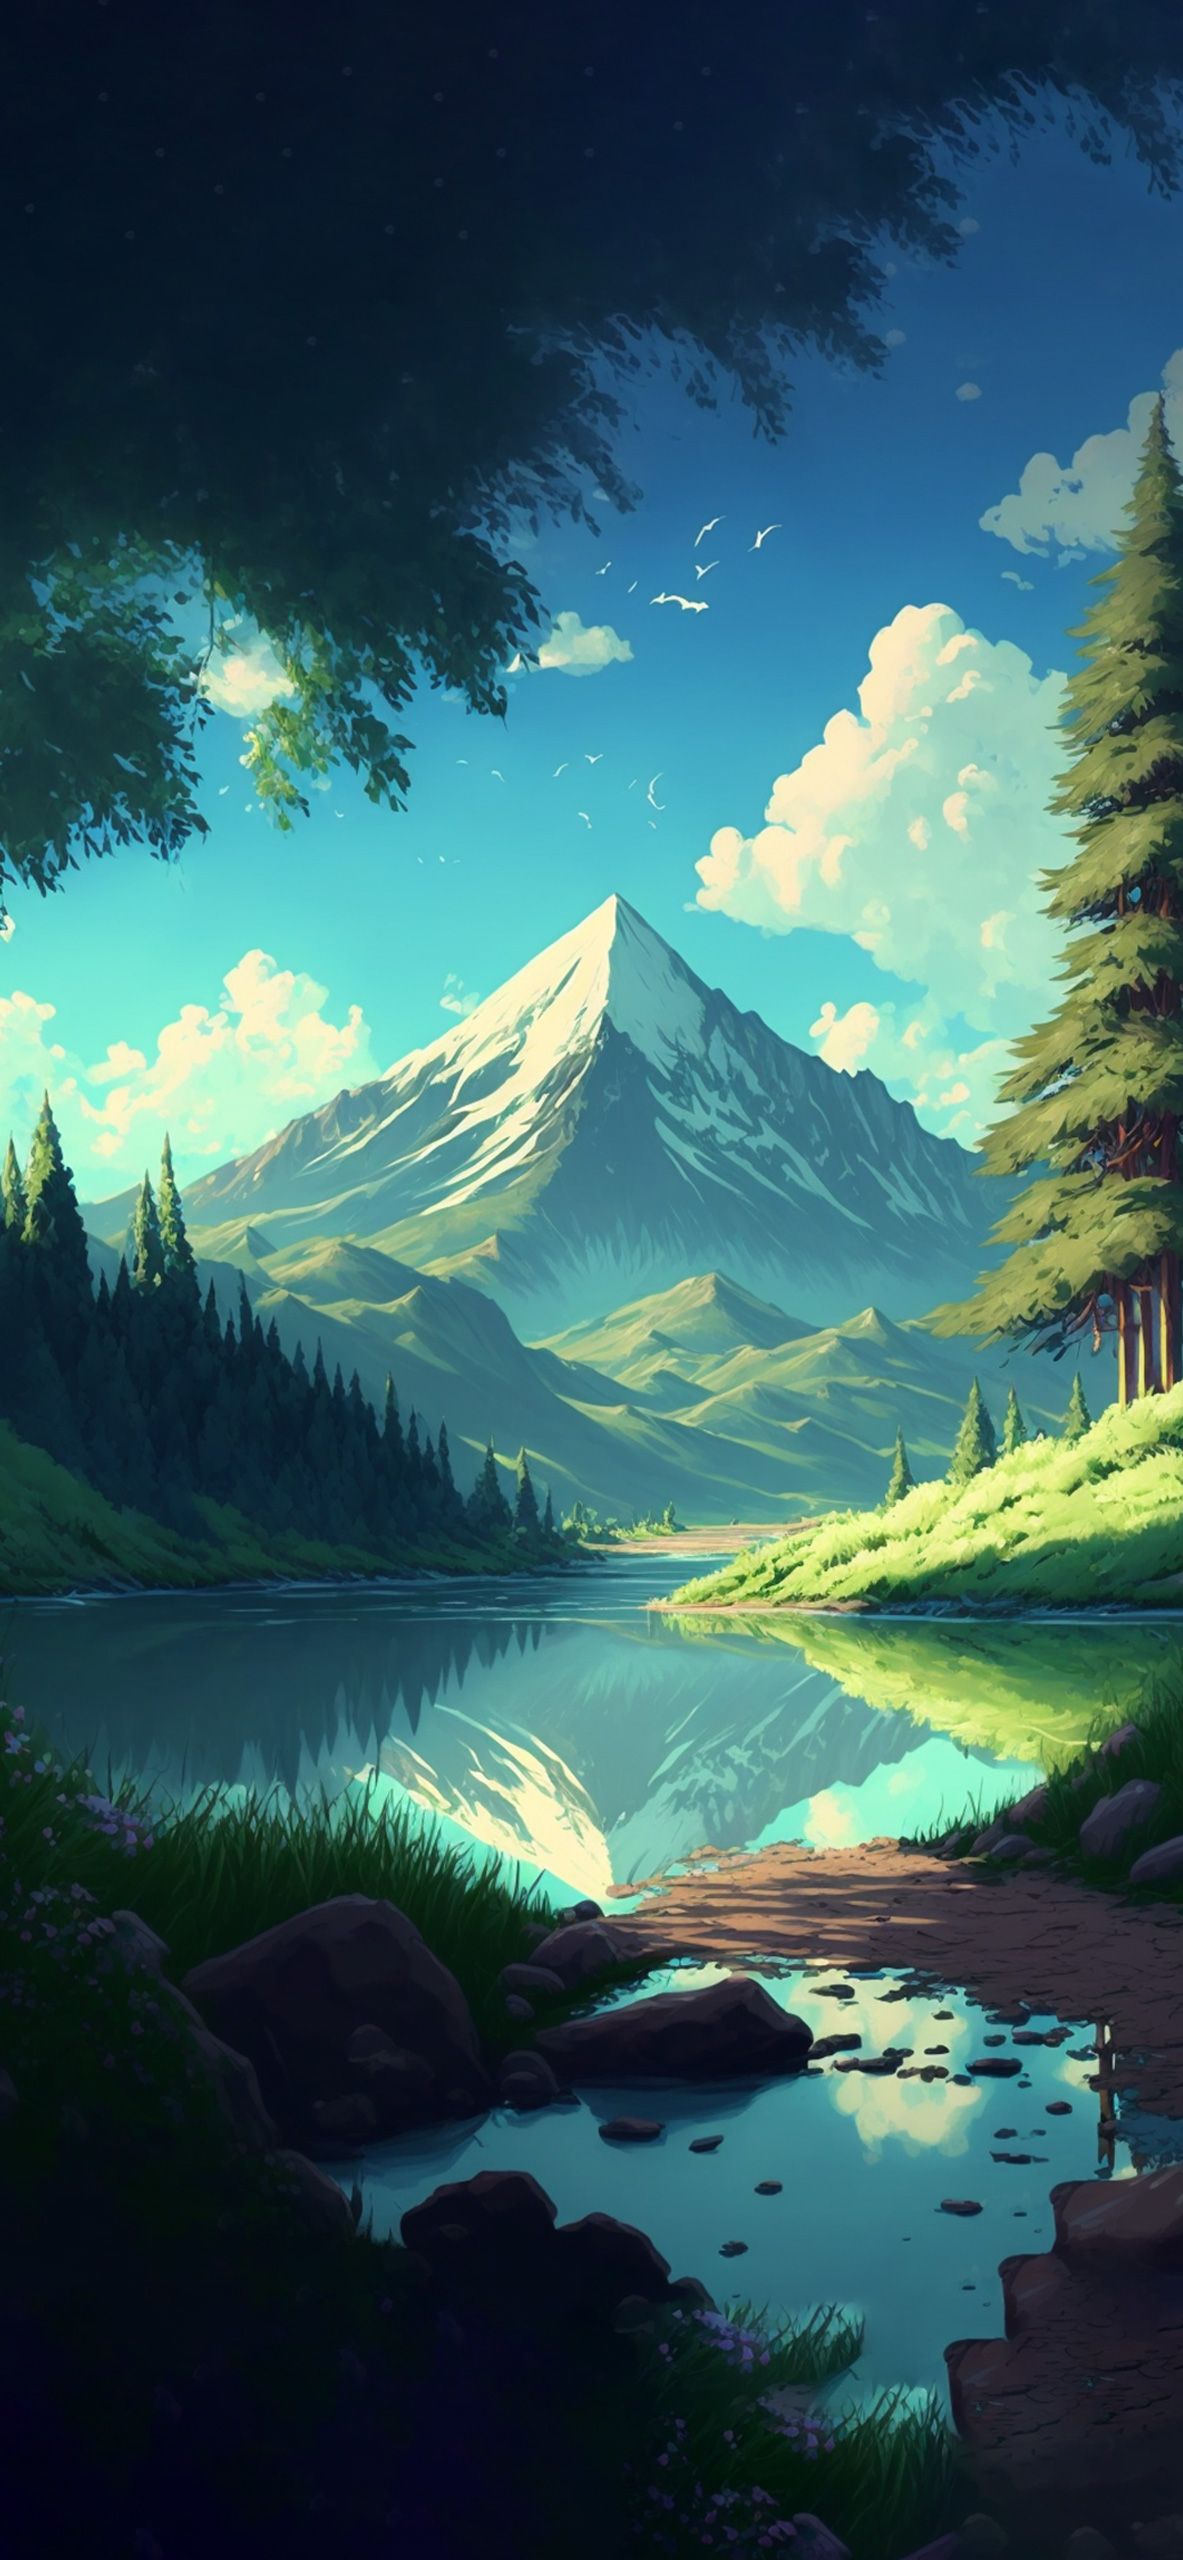 Aesthetic Forest Lake & Mountain Anime Background Wallpaper